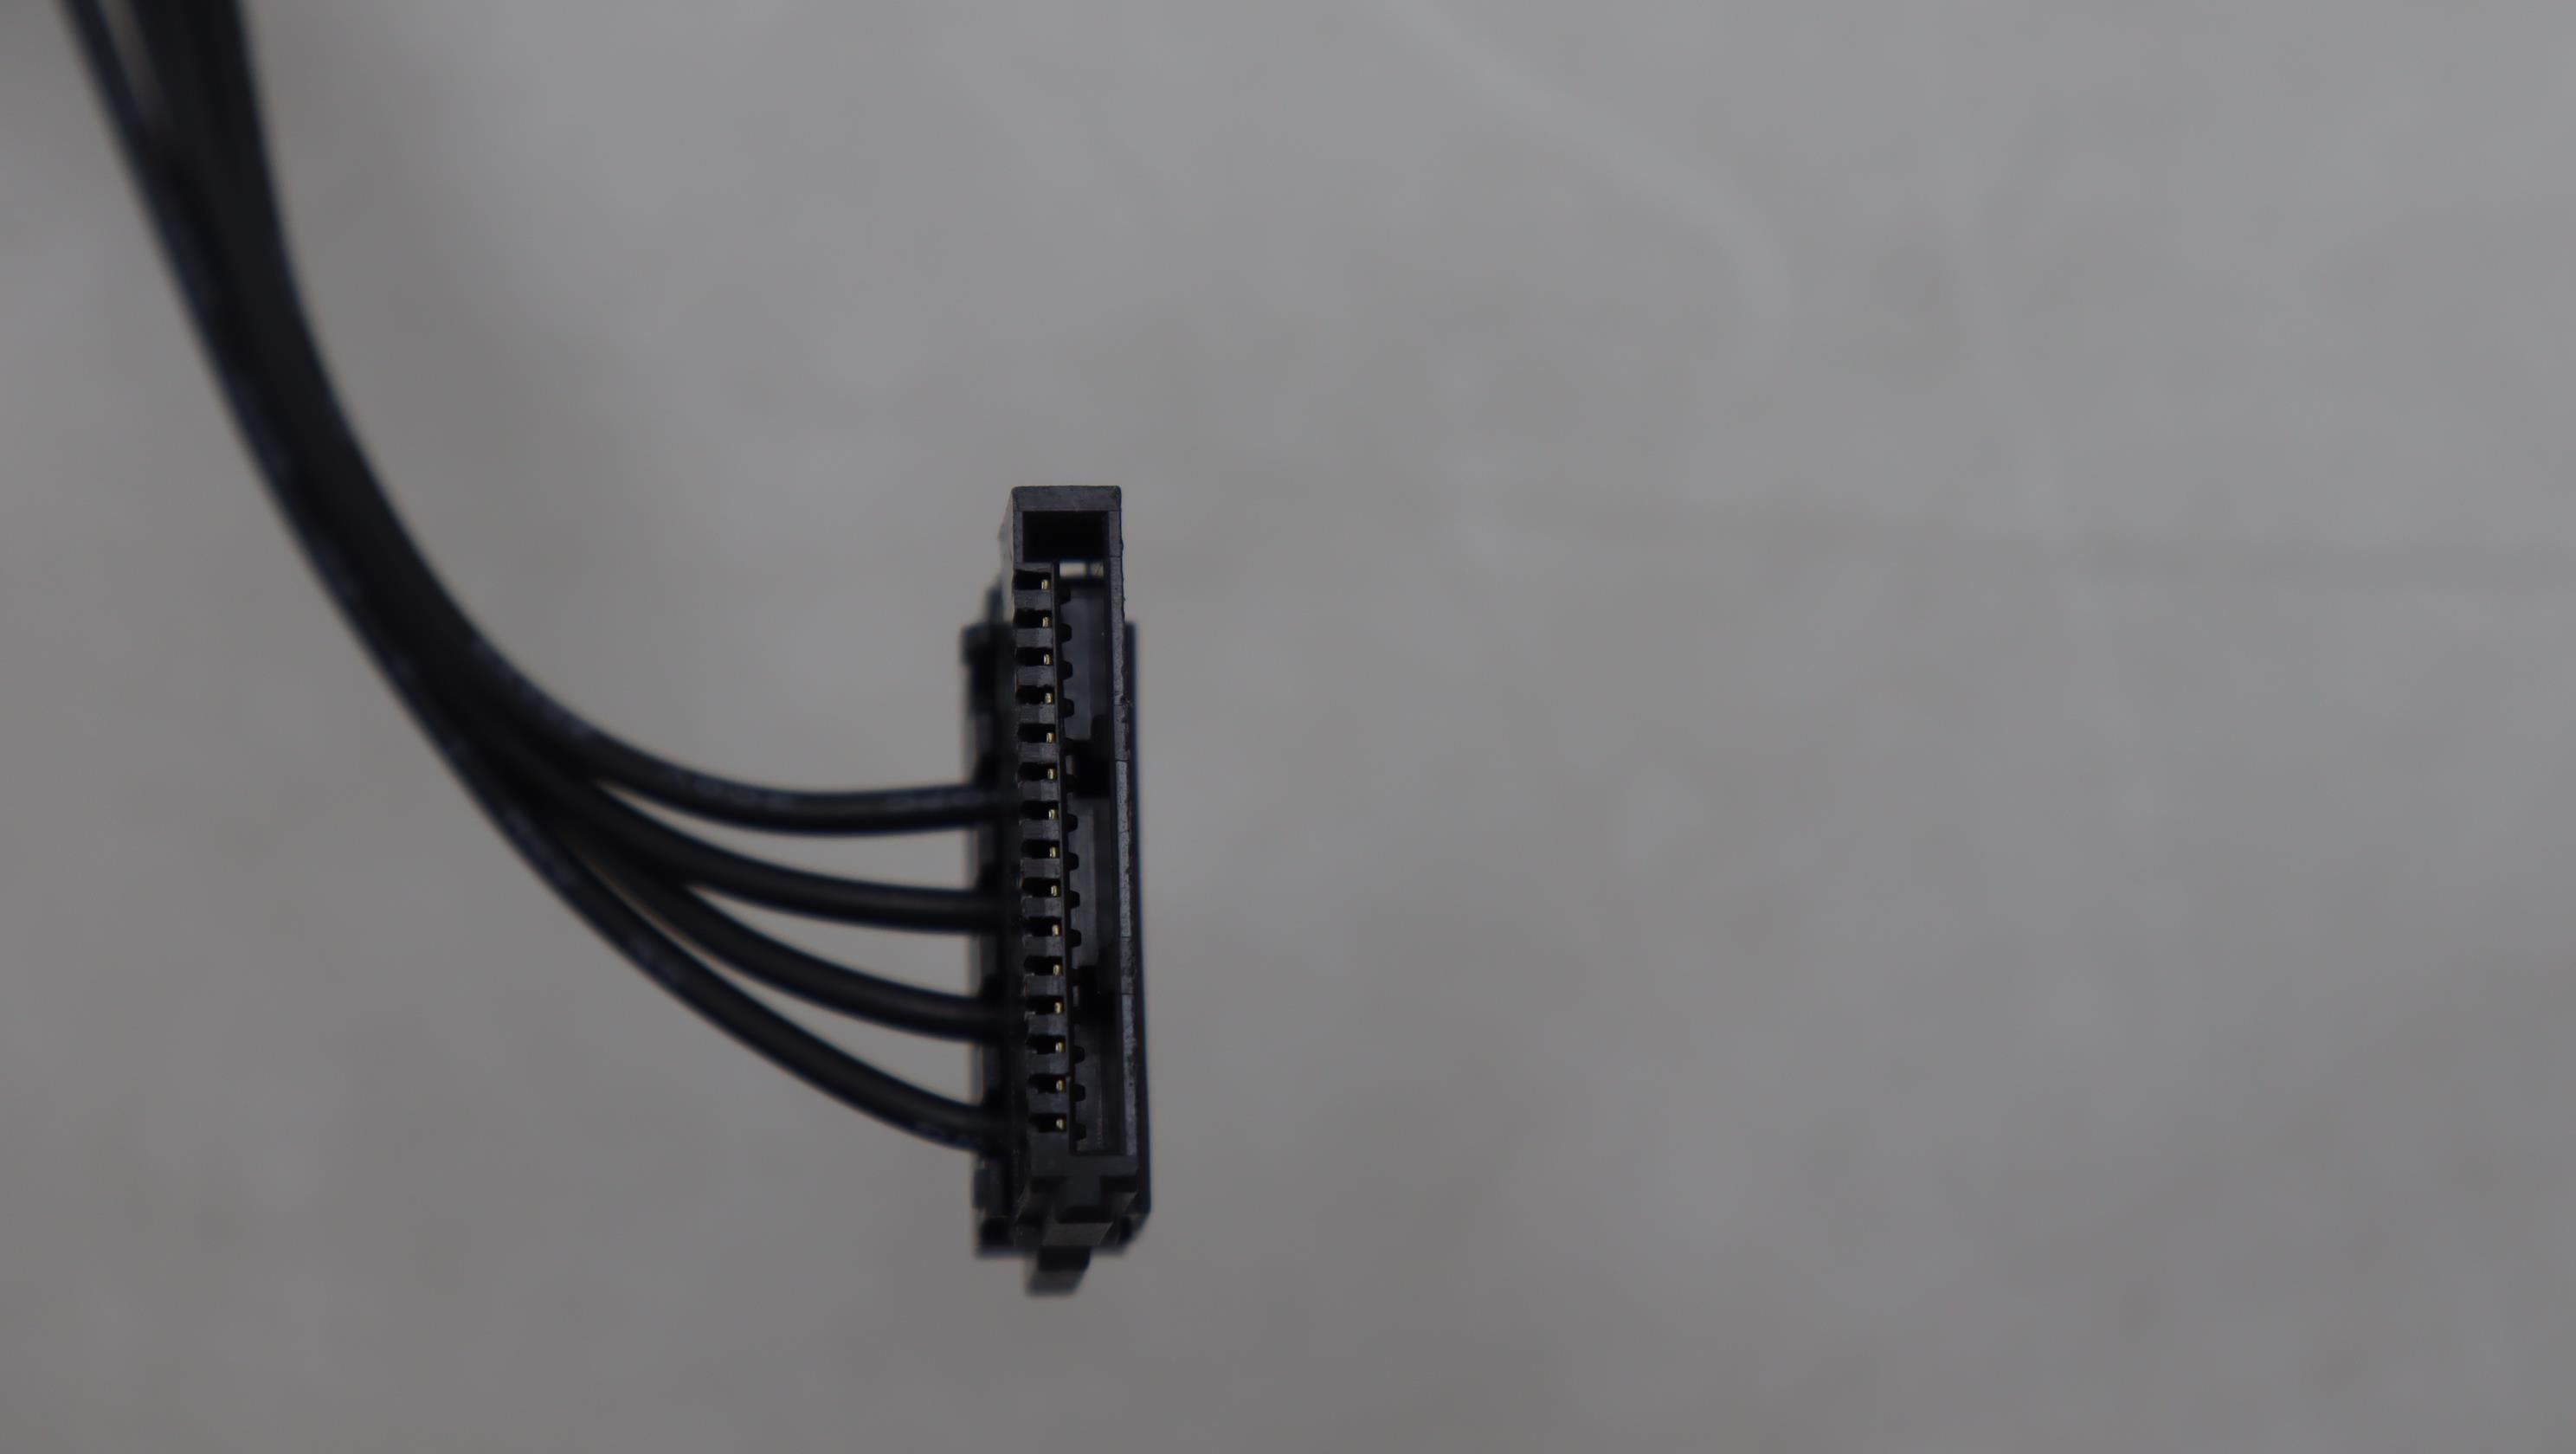 Lenovo Part  Original Lenovo Fru, SATA power cable(300mm+80mm)with 3.0pitch mini-fit  power connector_TCO8.0